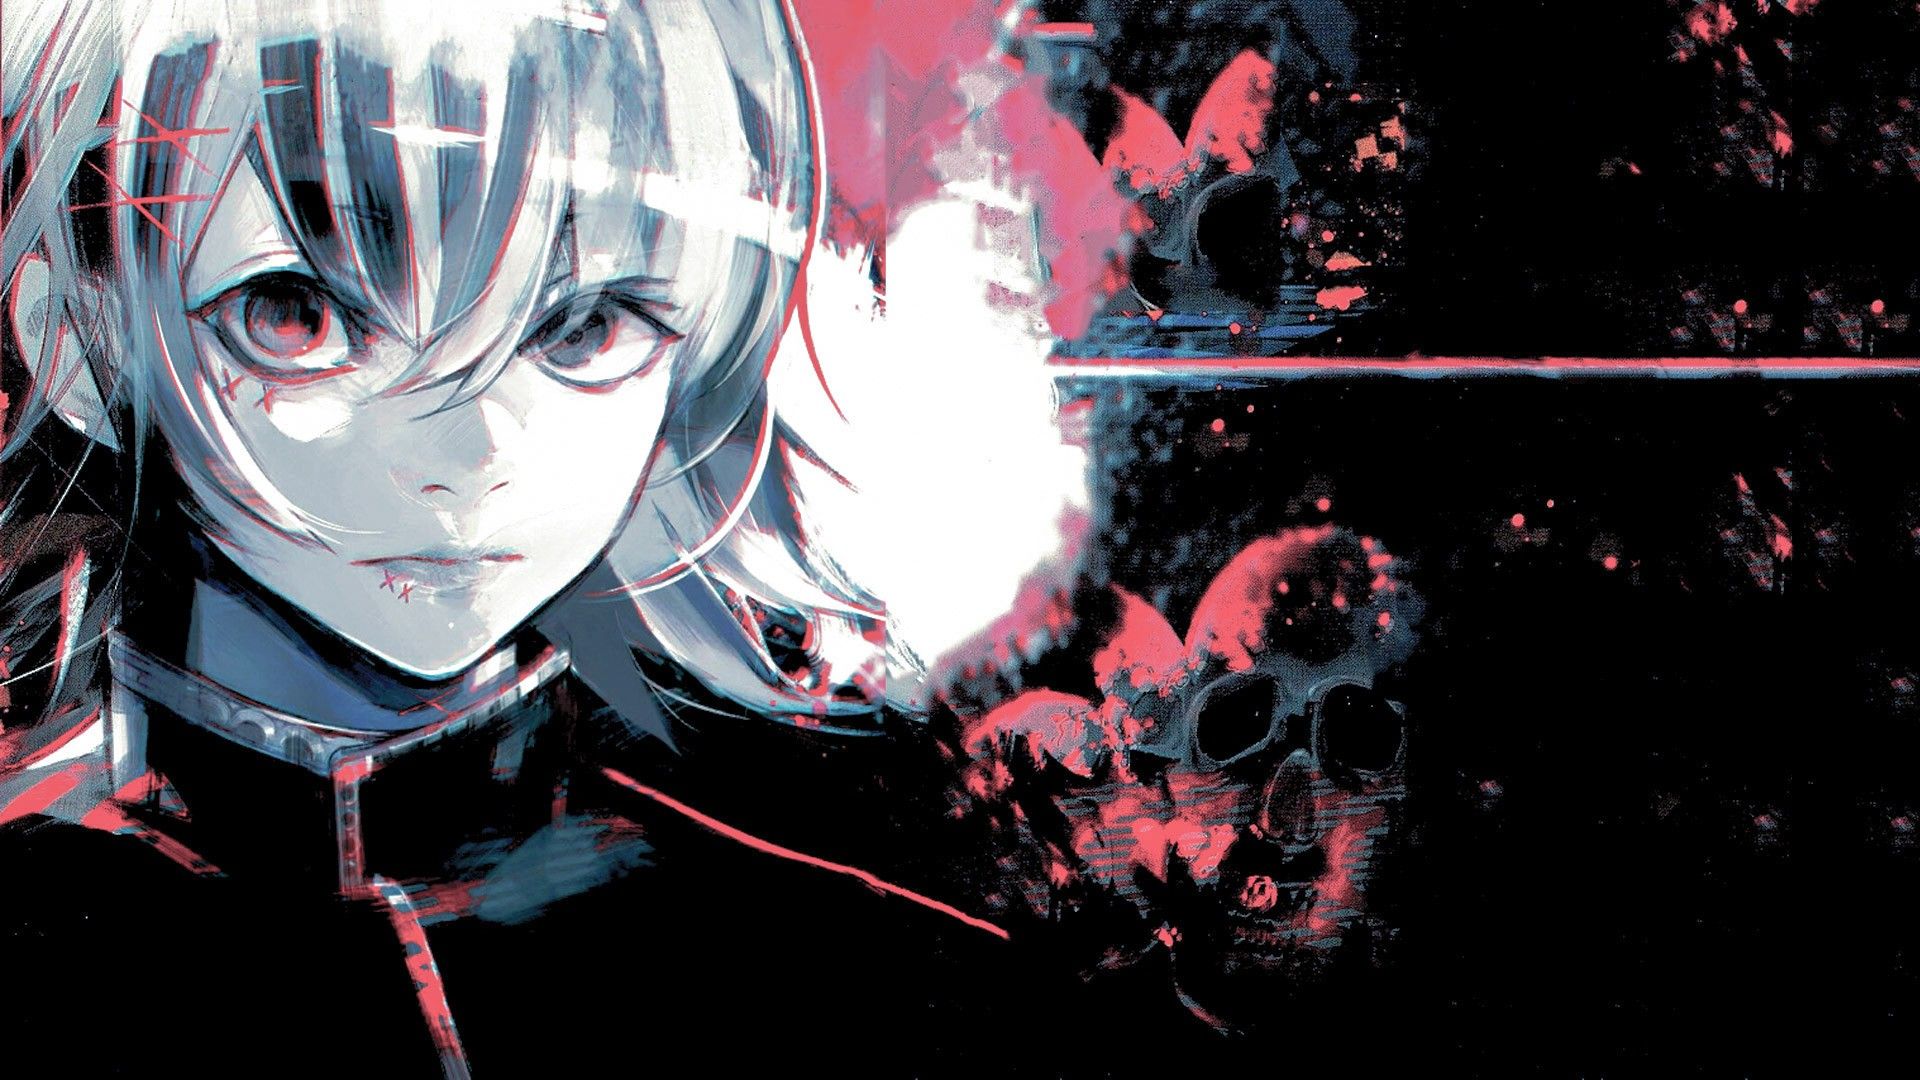 Tokyo Ghoul Re Tome 12